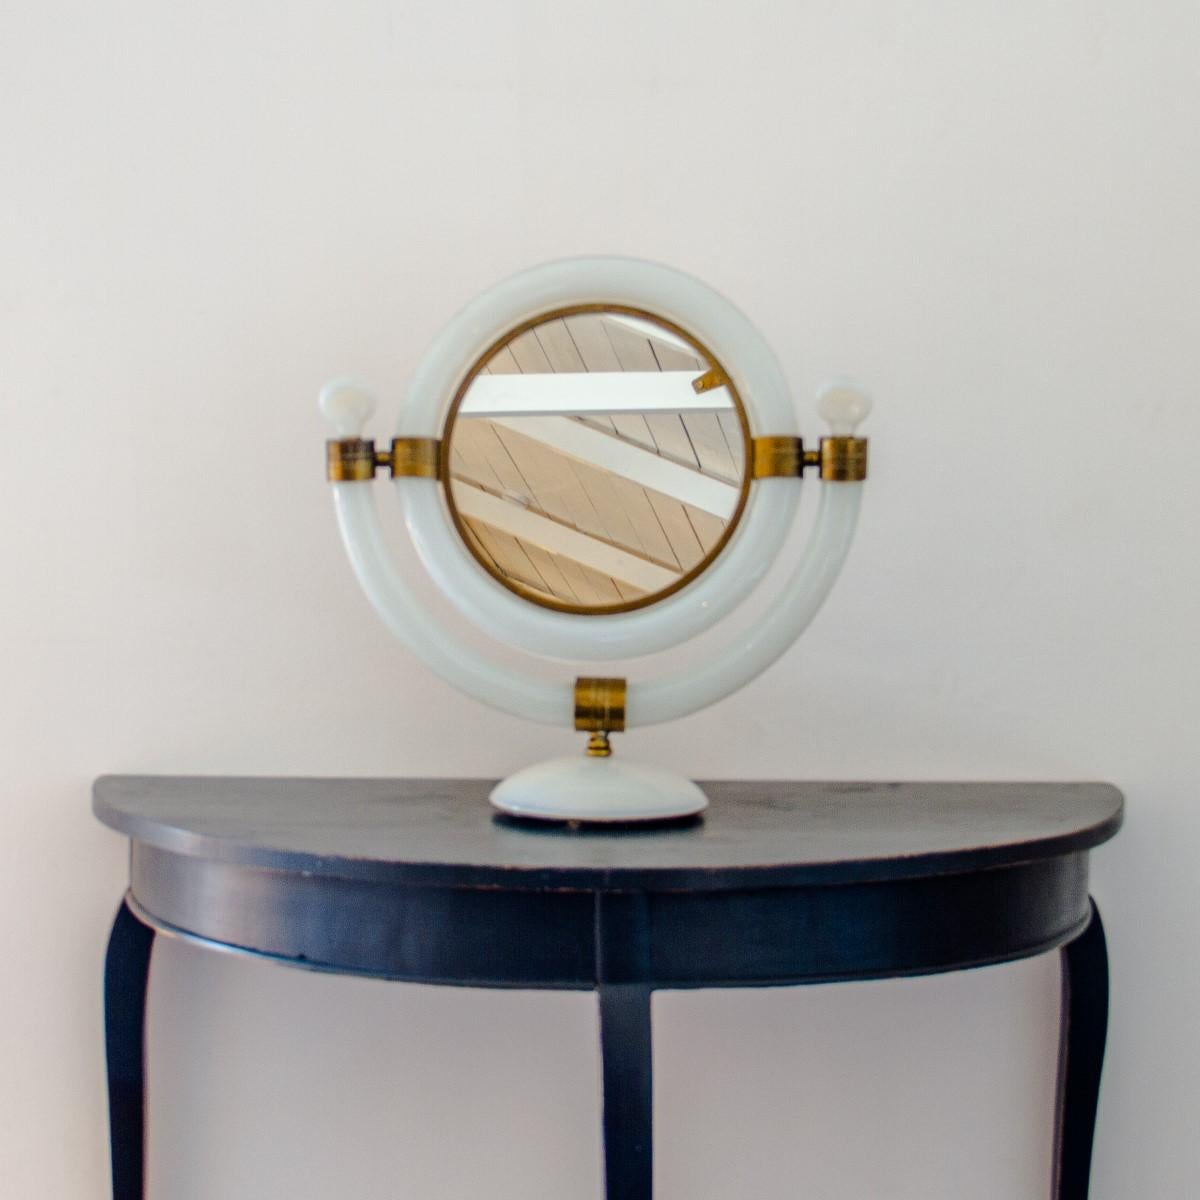 A Superb Italian, white opulescent glass dressing mirror, with brass fixing details and framing the mirror plate, by Seguso, 1950s.

The Seguso family are a historical part of the Murano glass island, trading since 1397. They have one of the